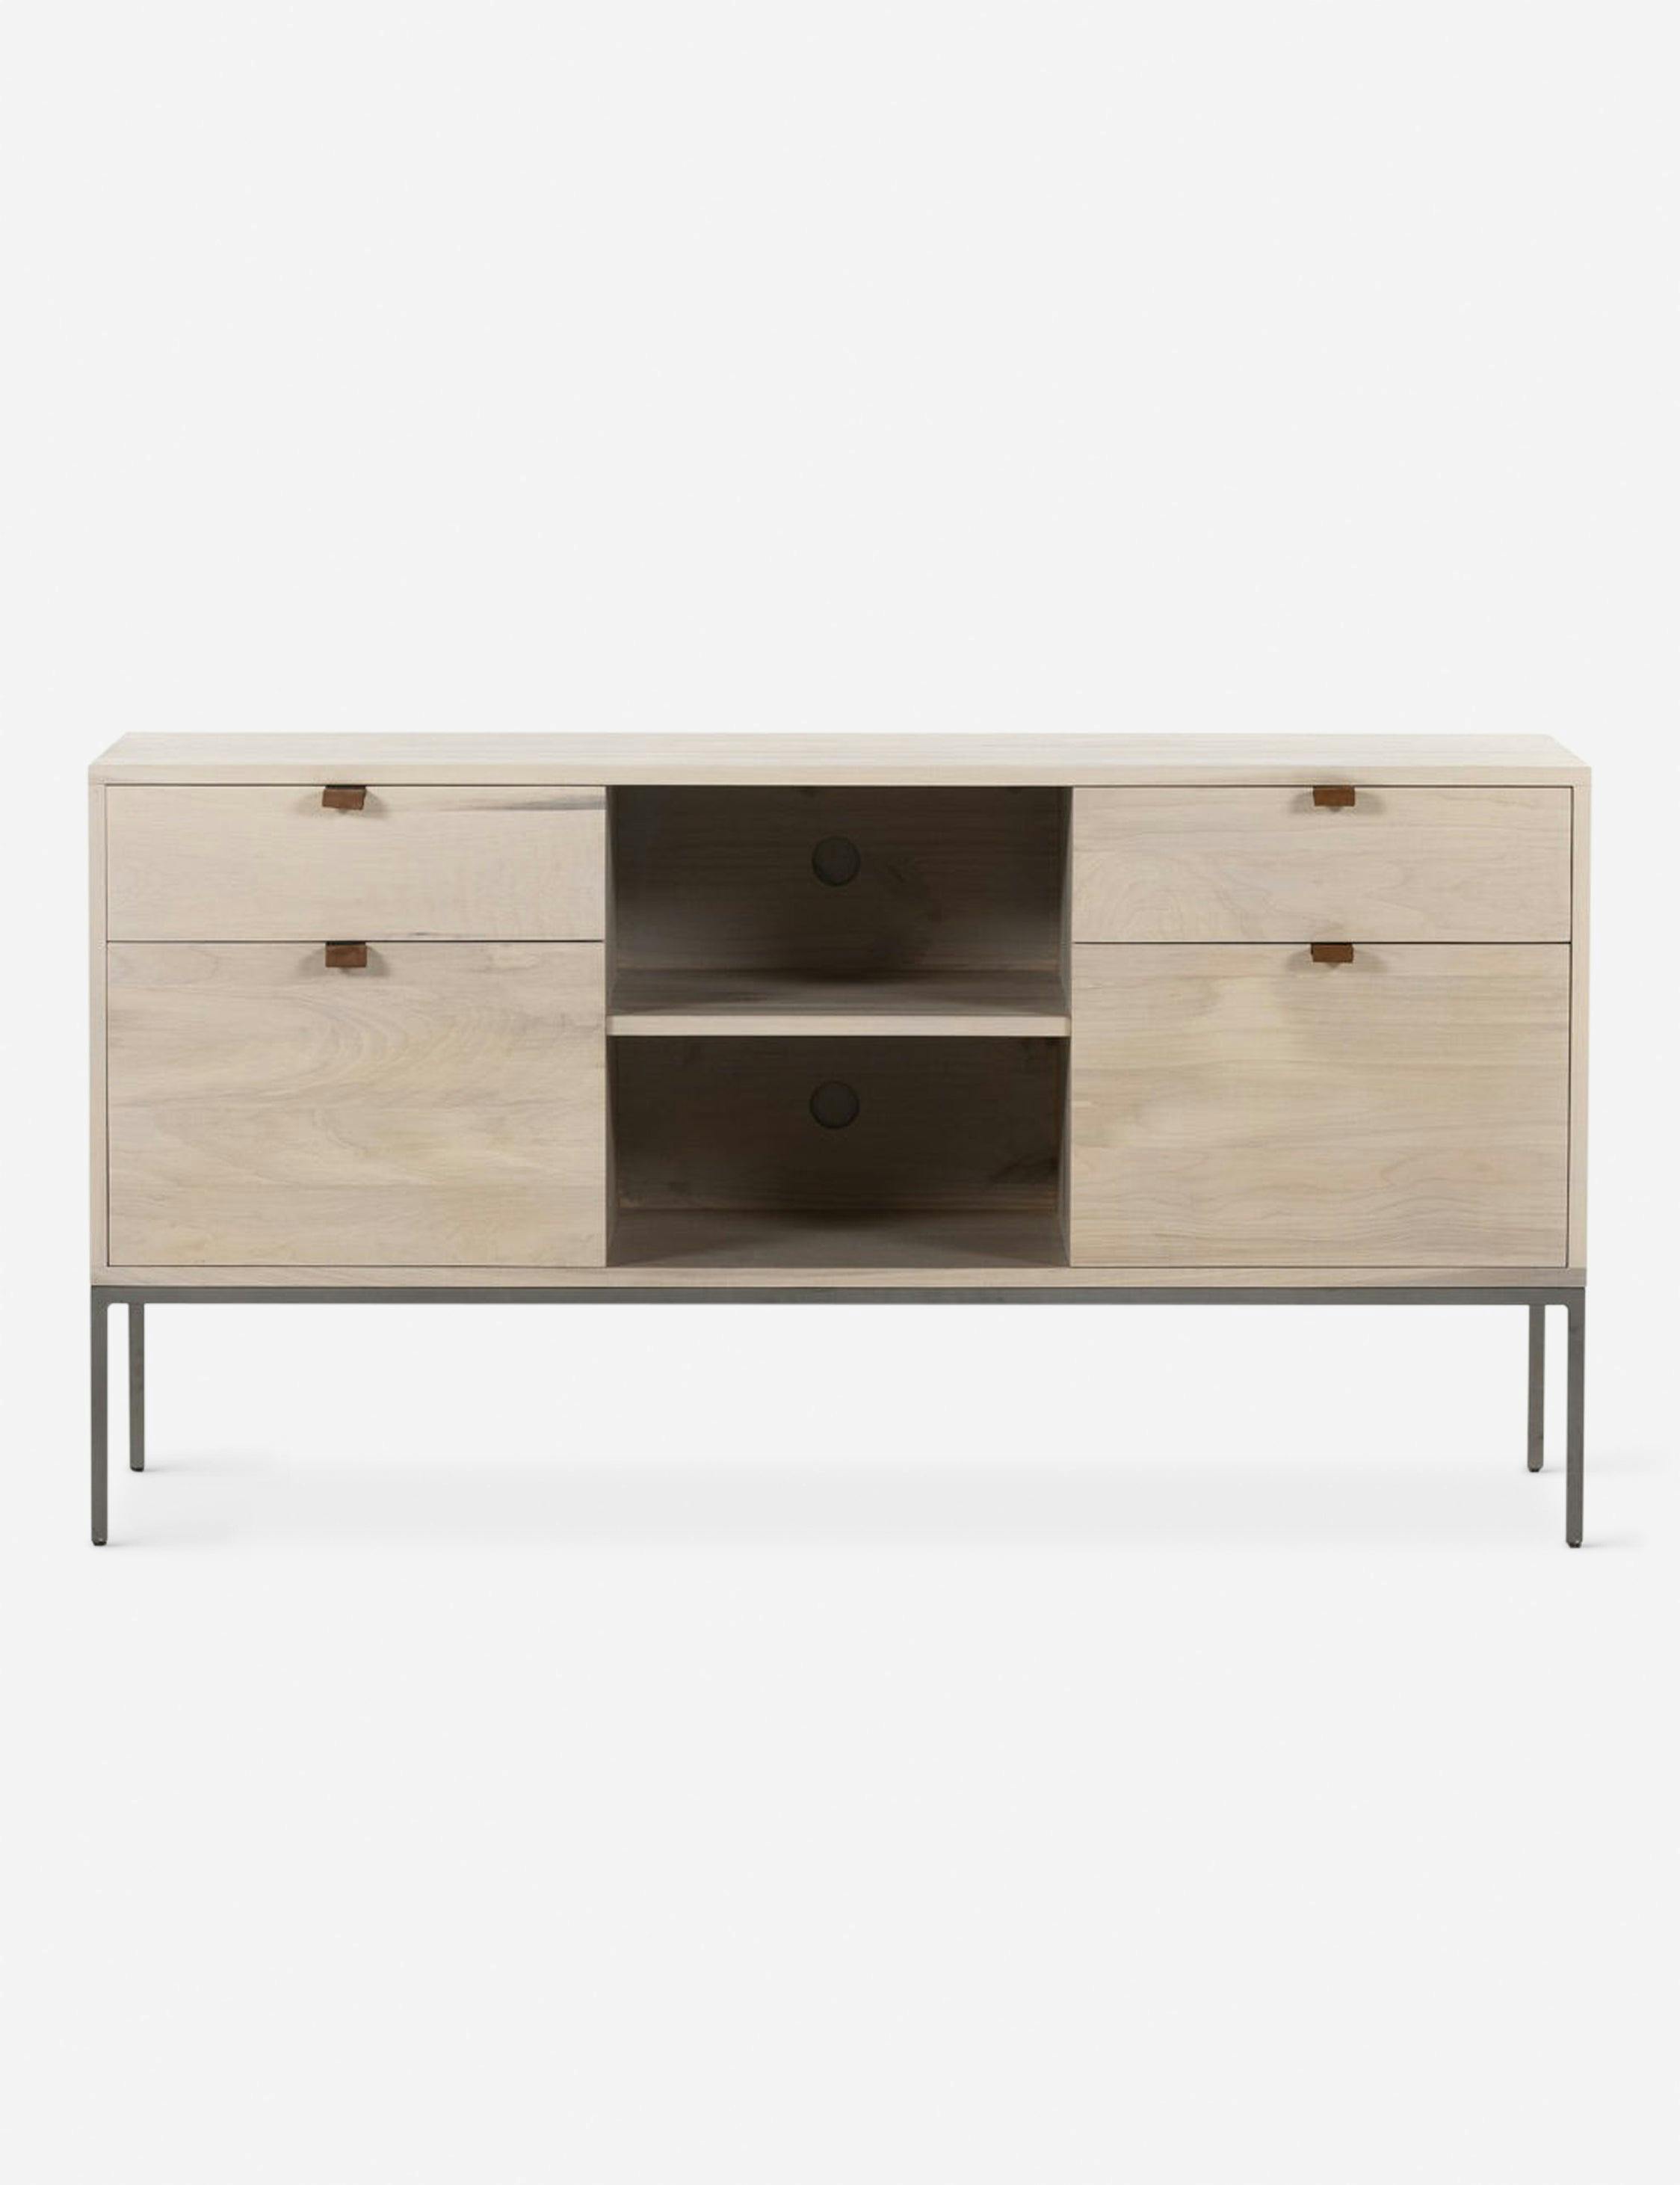 Contemporary White Modular Filing Credenza with Leather Pulls